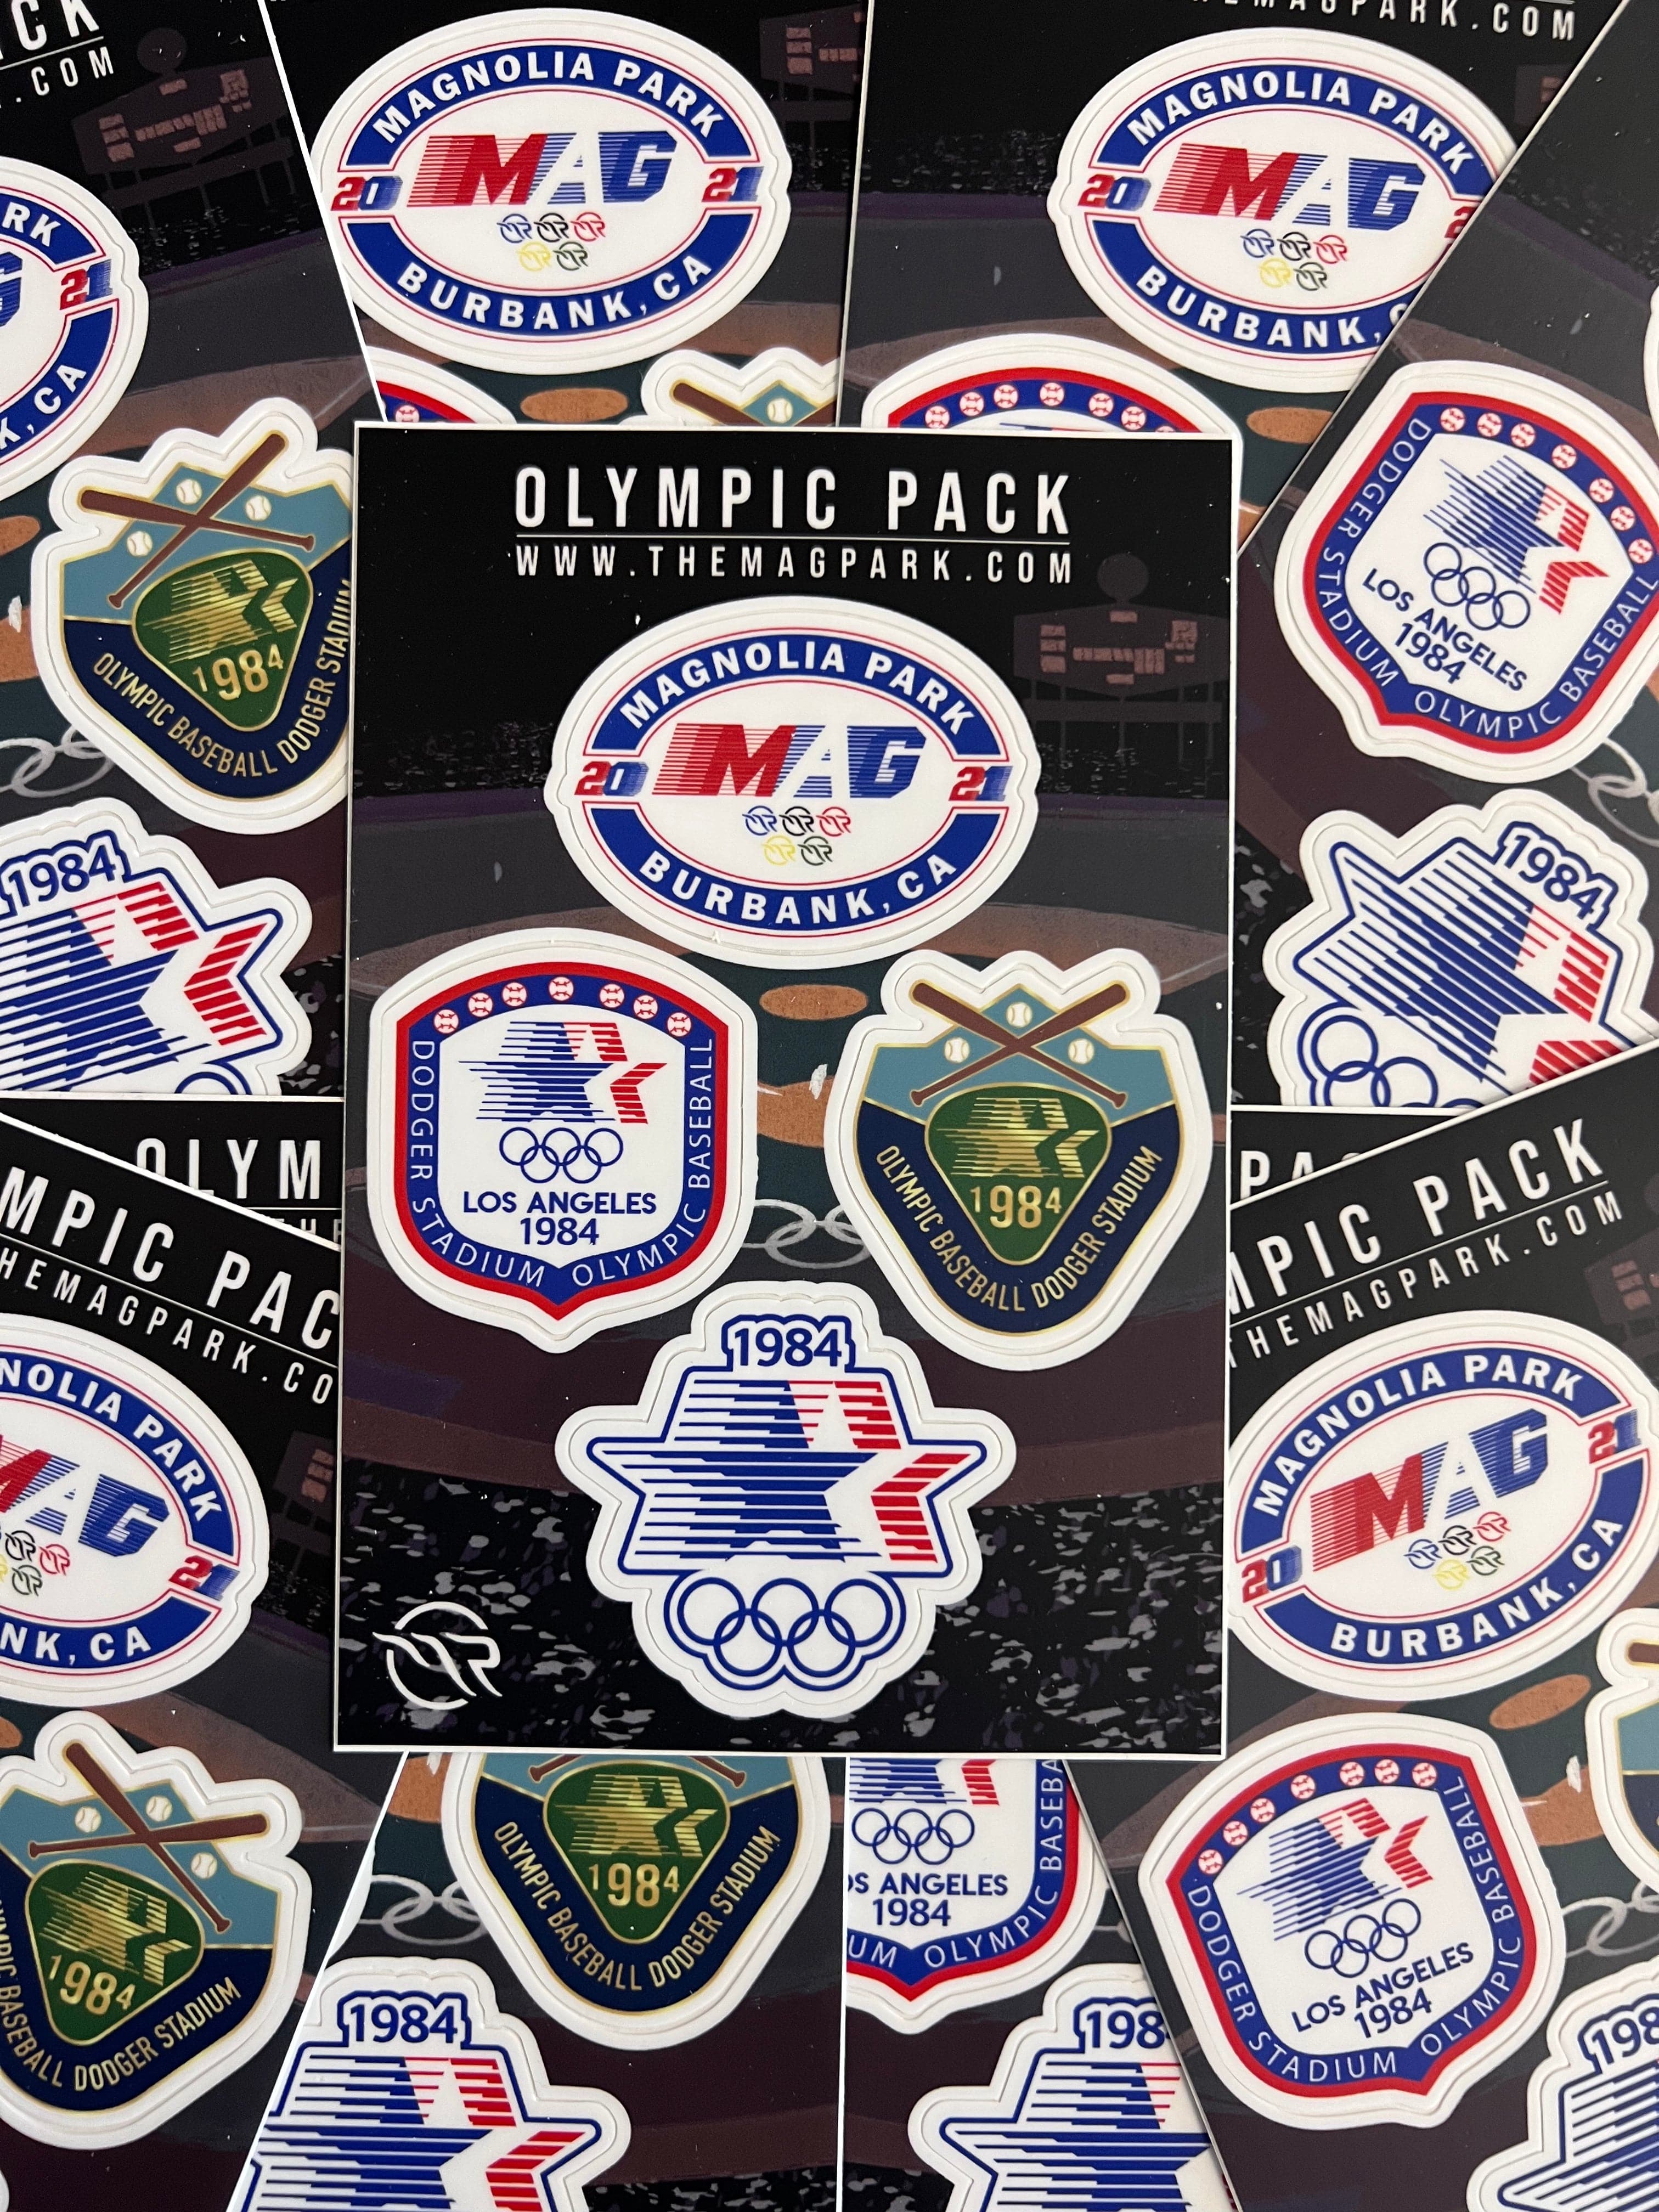 The Magnolia Park Olympic Sticker Pack